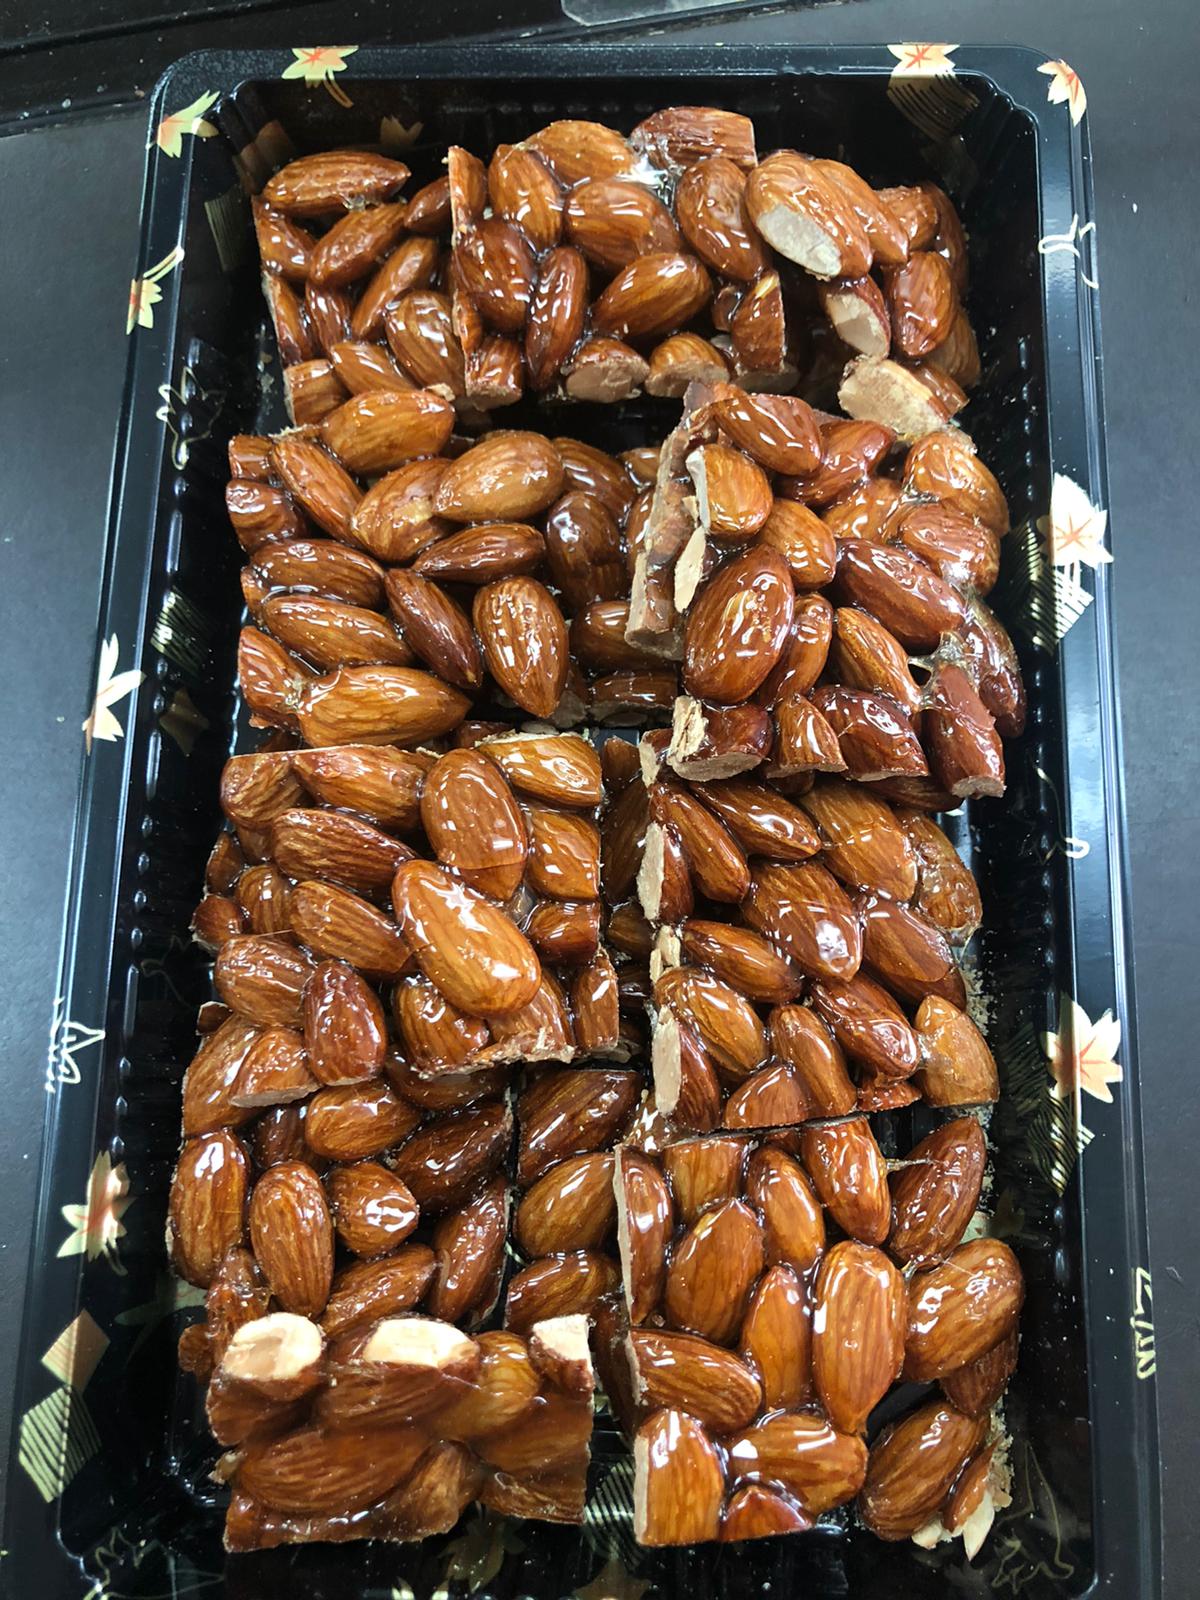 Almond Caramel bites made by Ely's Fine Foods in Toronto